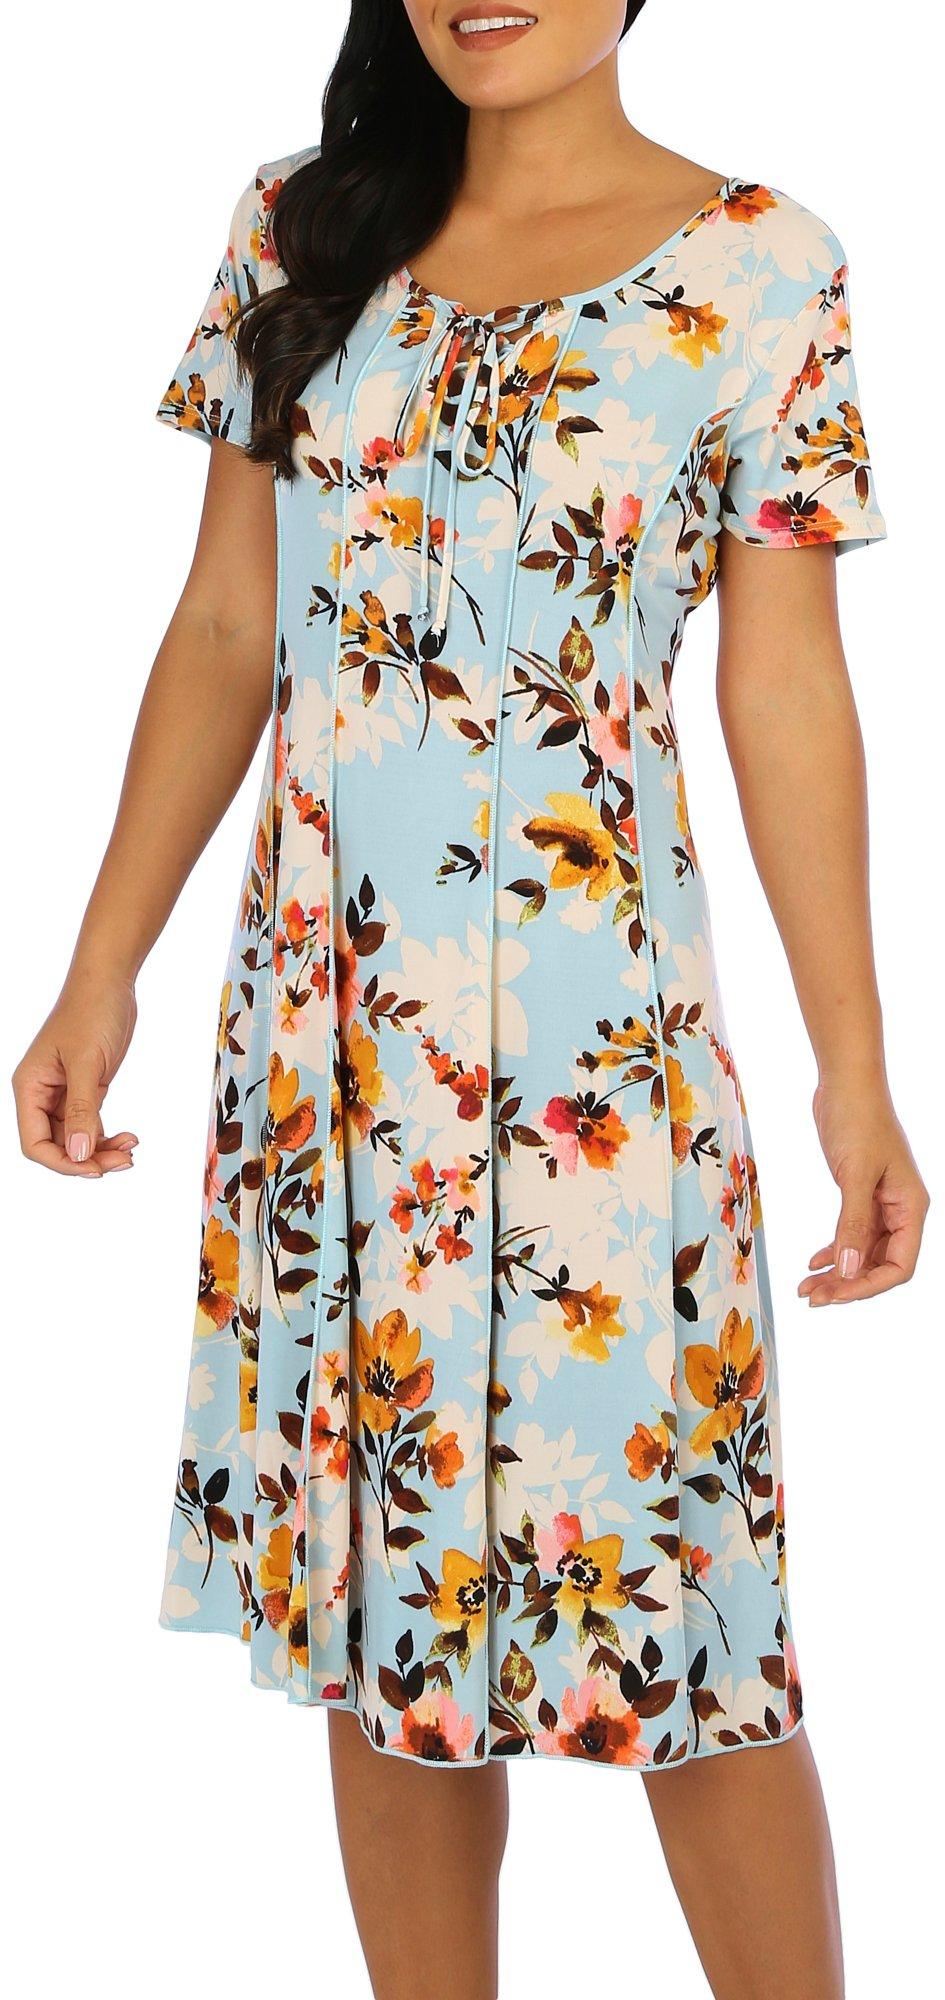 Womens Floral Seamed Pleated Short Sleeve Dress